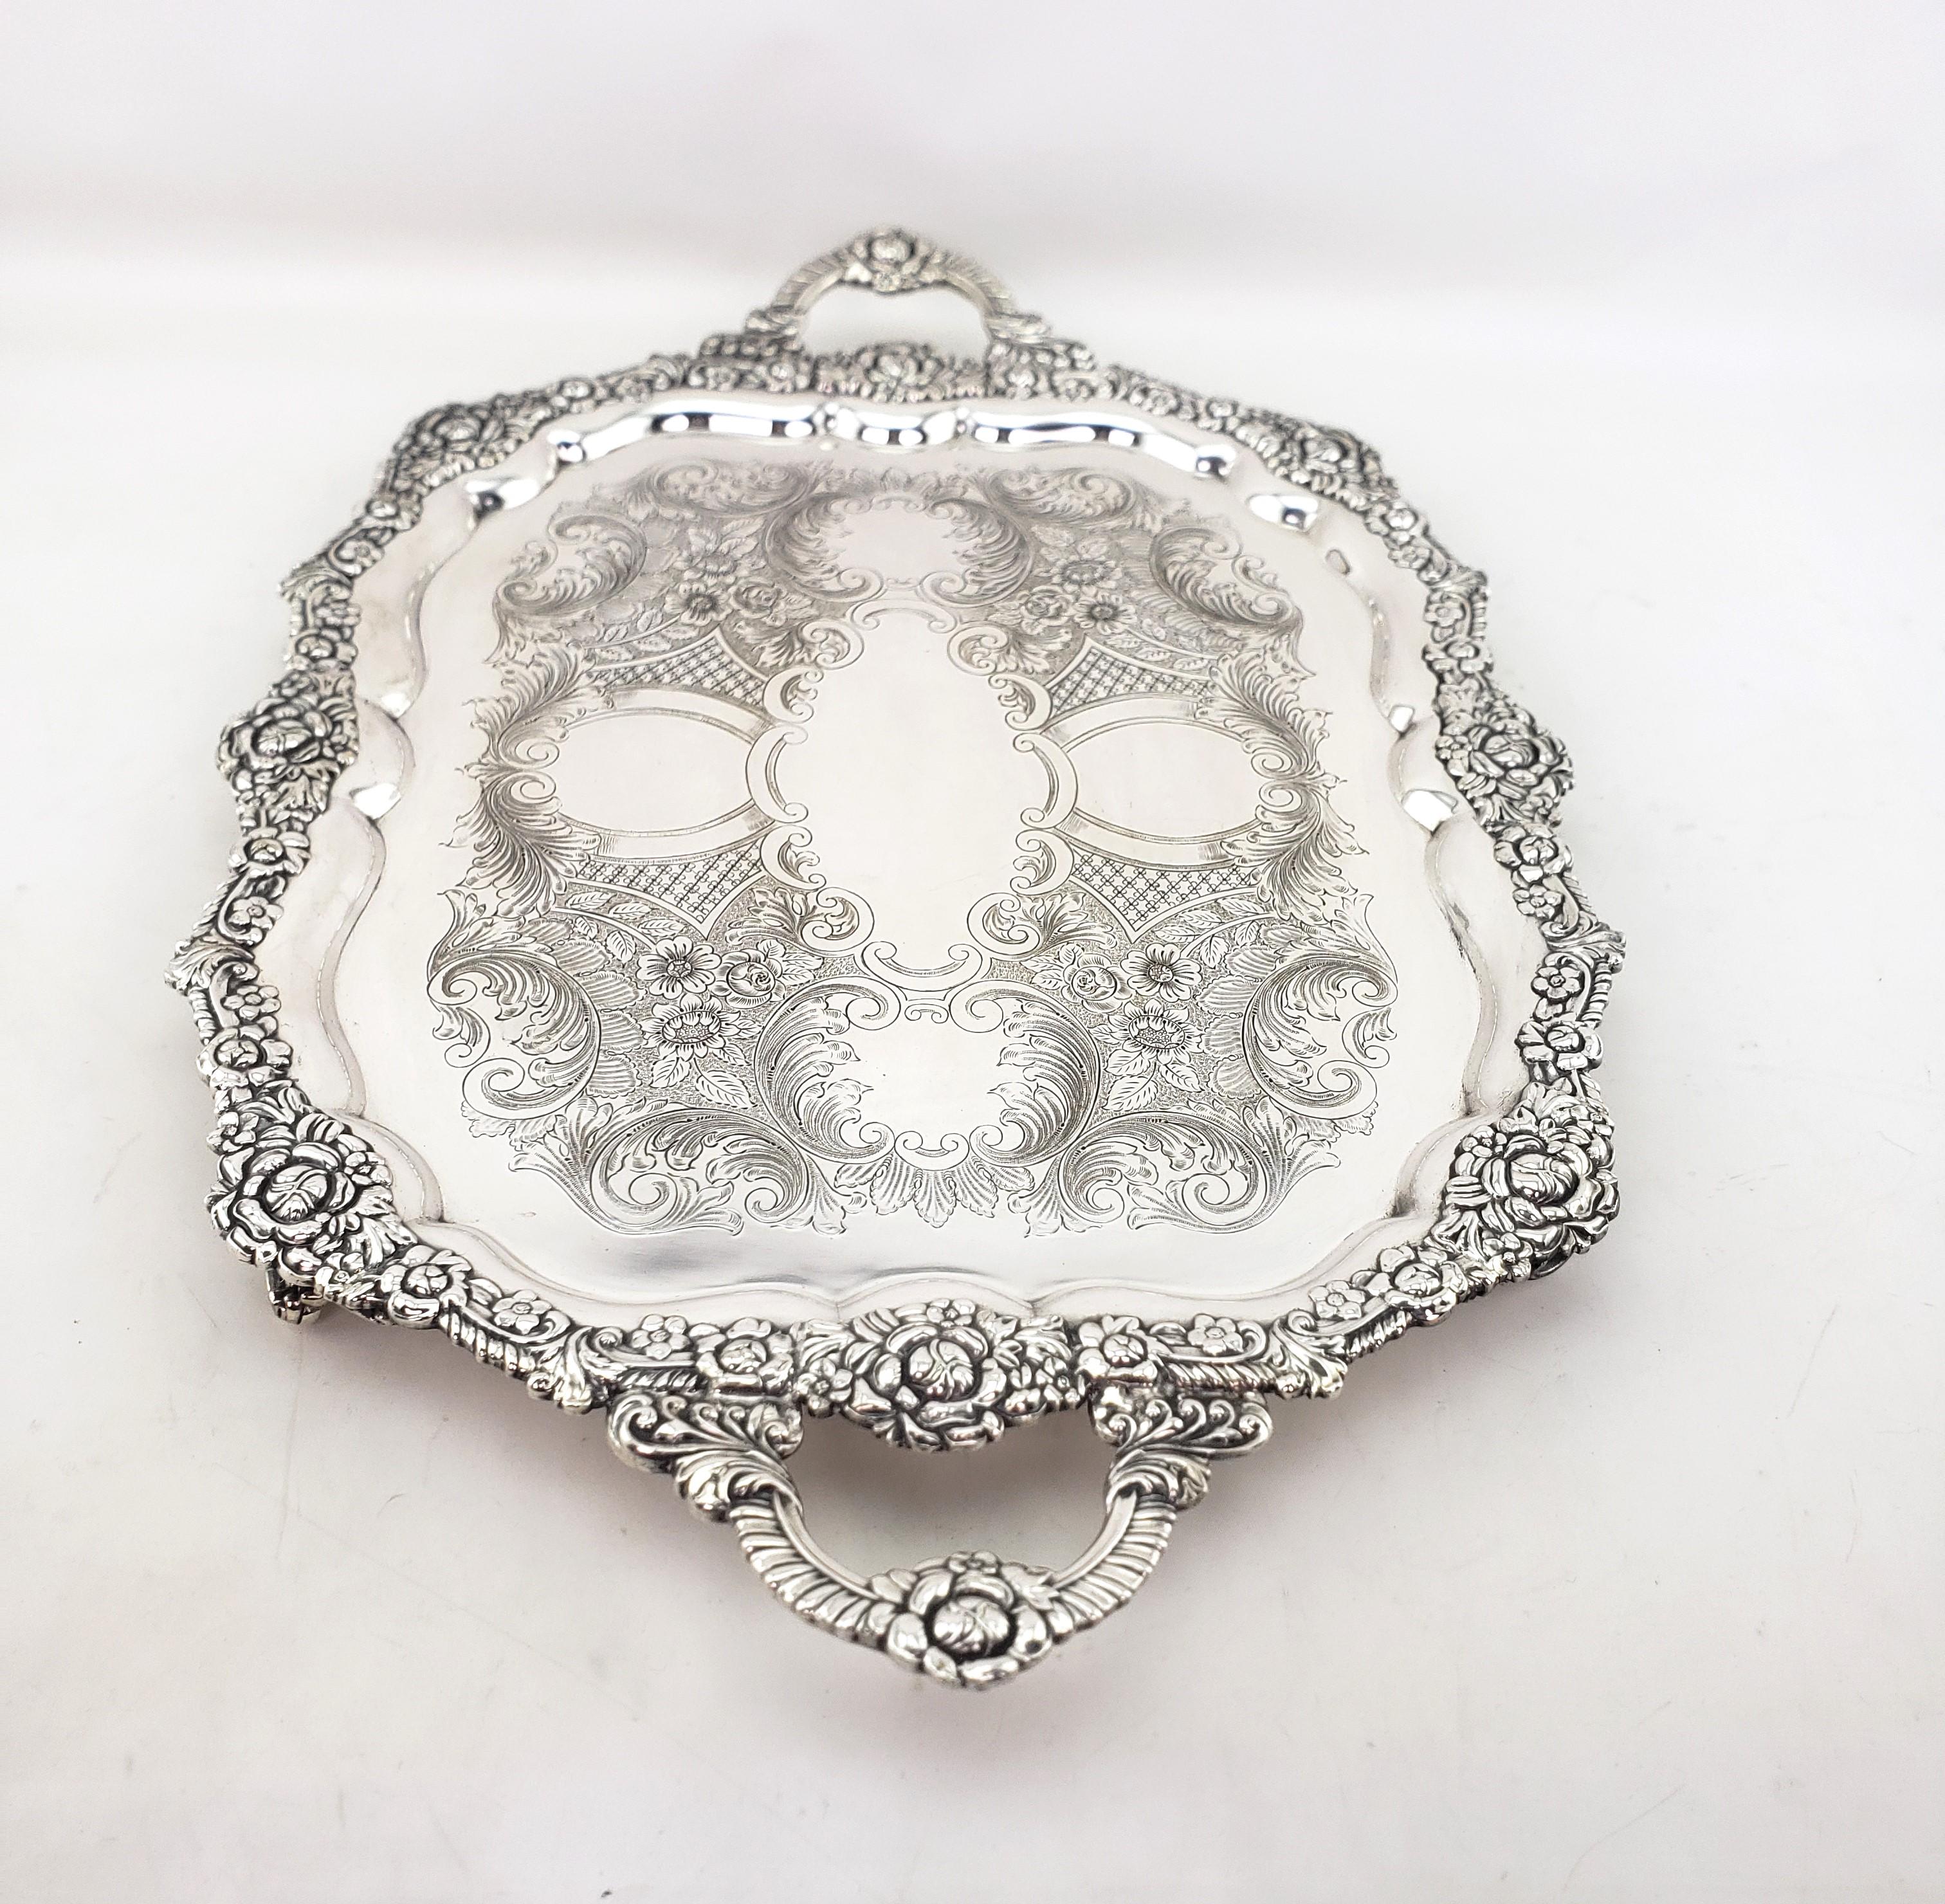 19th Century Large Antique English Silver Plated Serving Tray with Ornate Floral Decoration For Sale